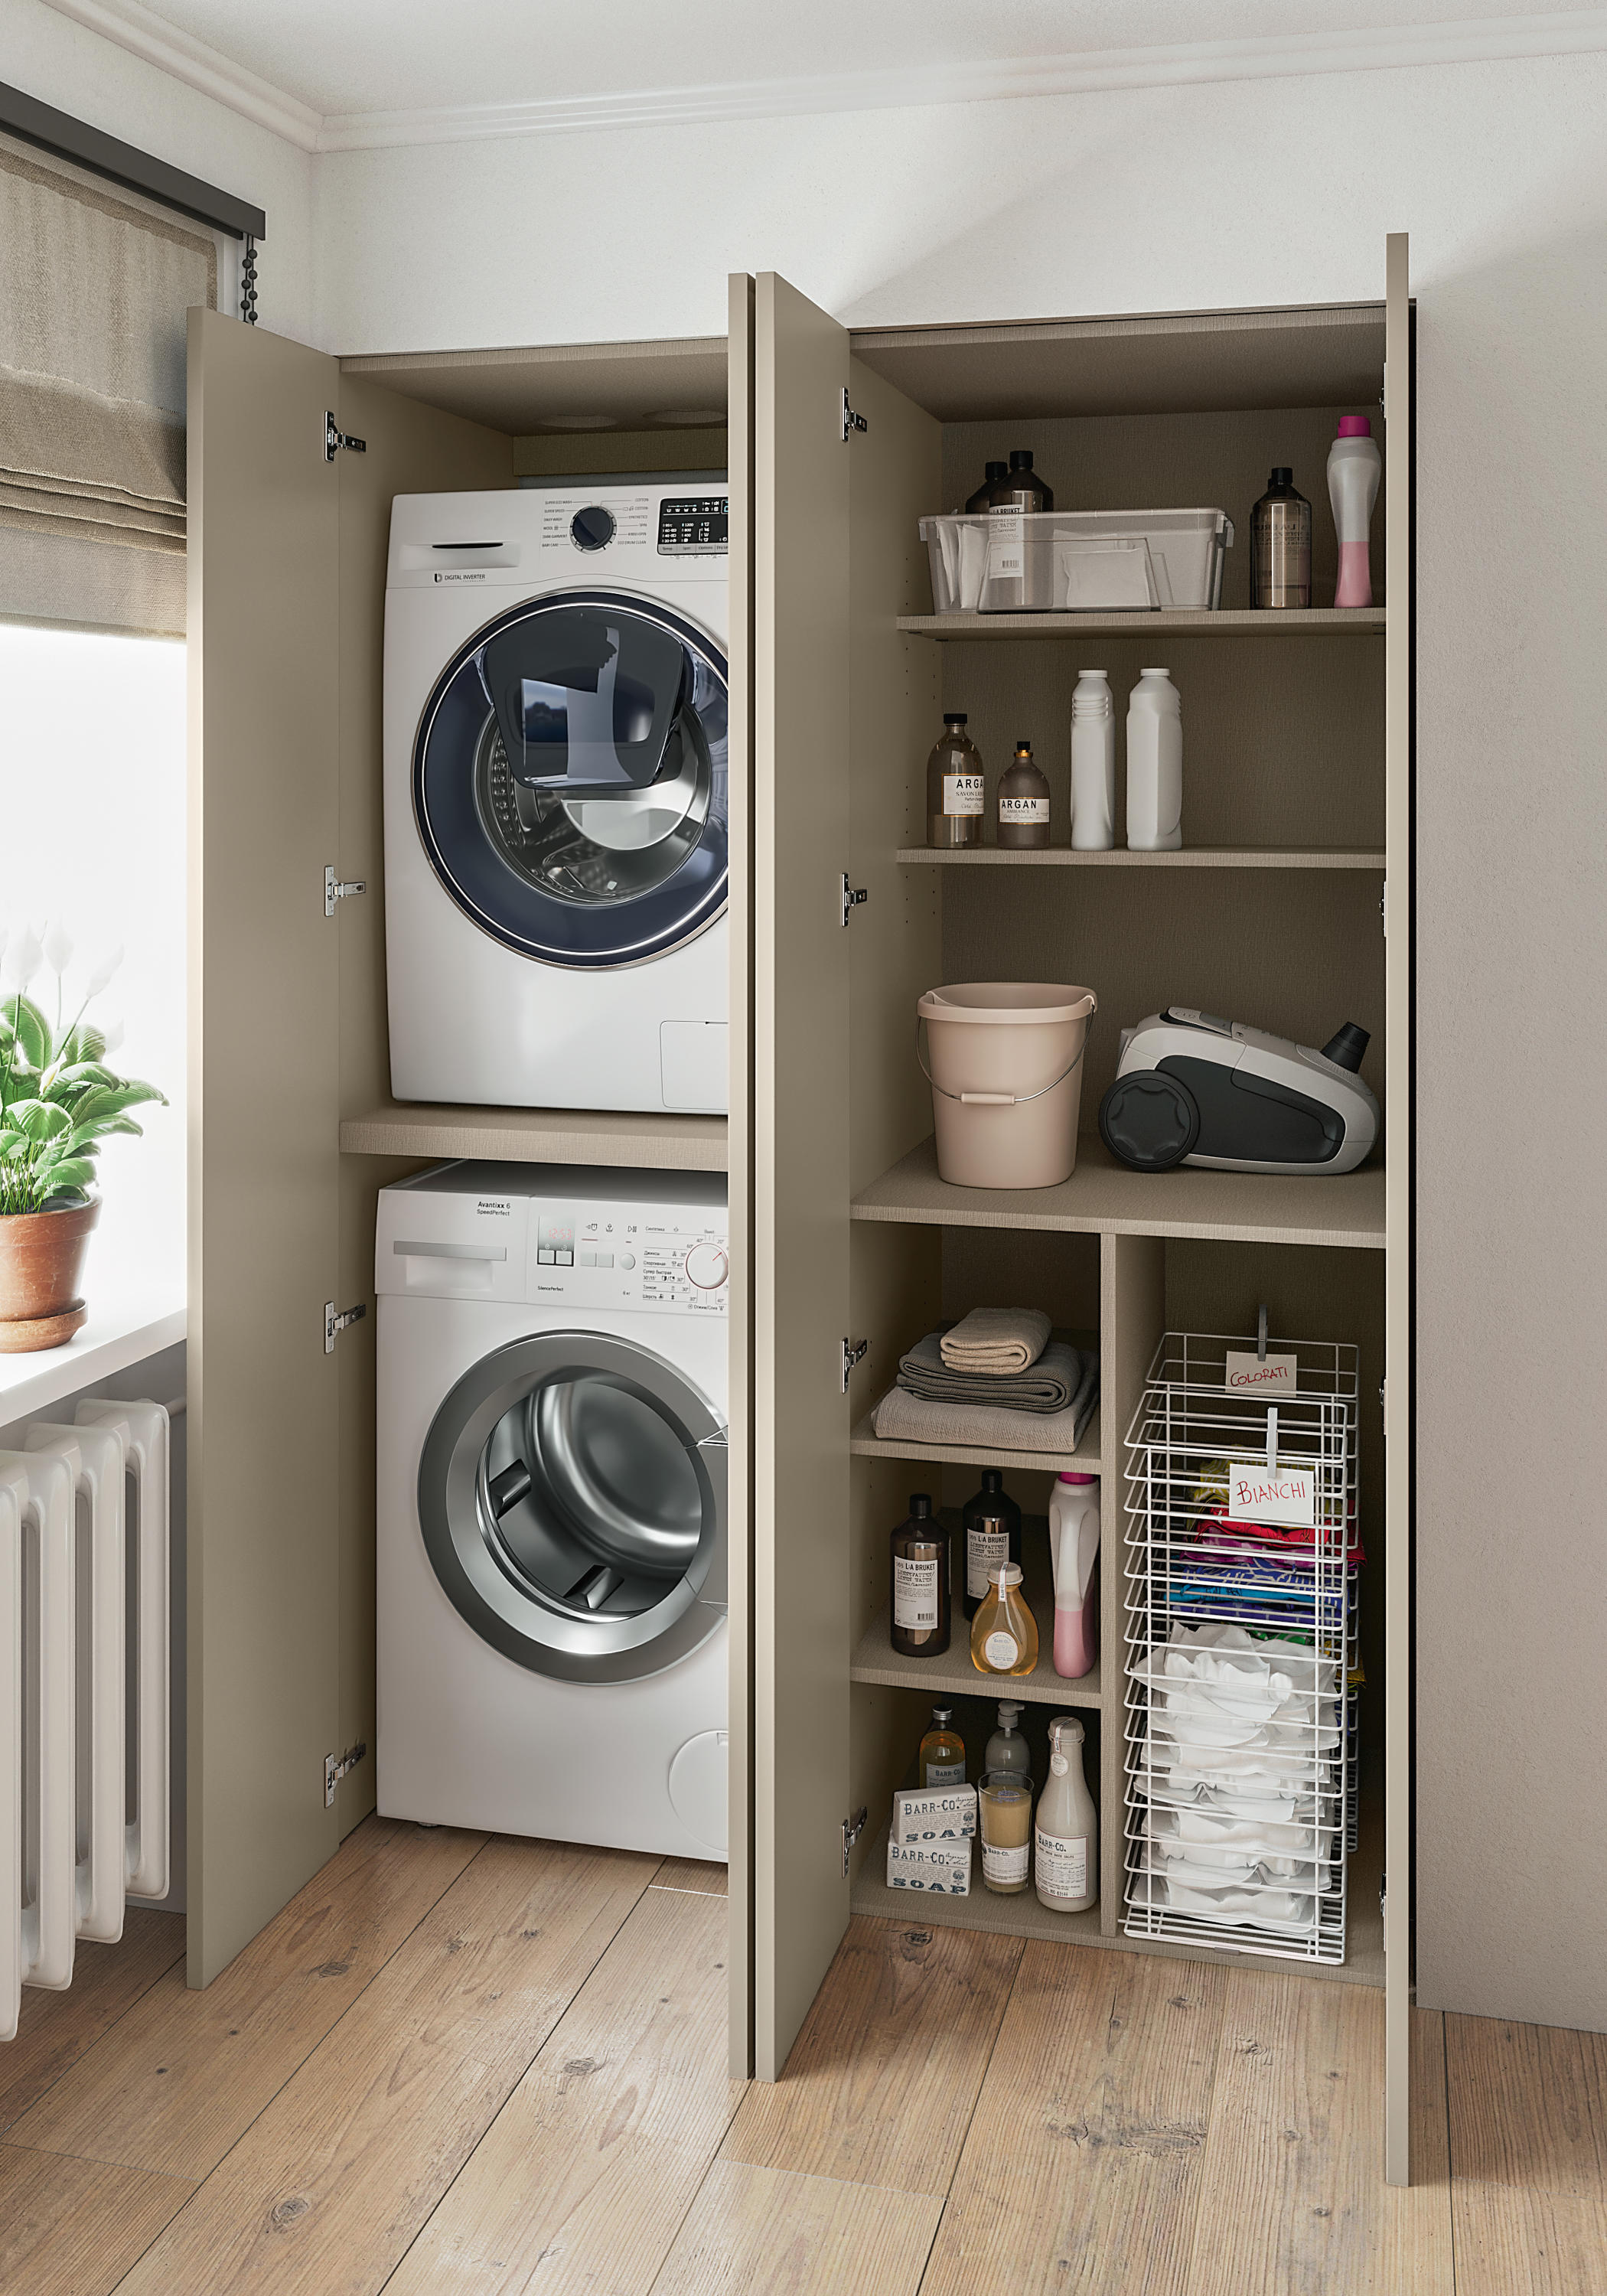 Suite Vintage Laundry | Vintage furniture collection for laundry room ...